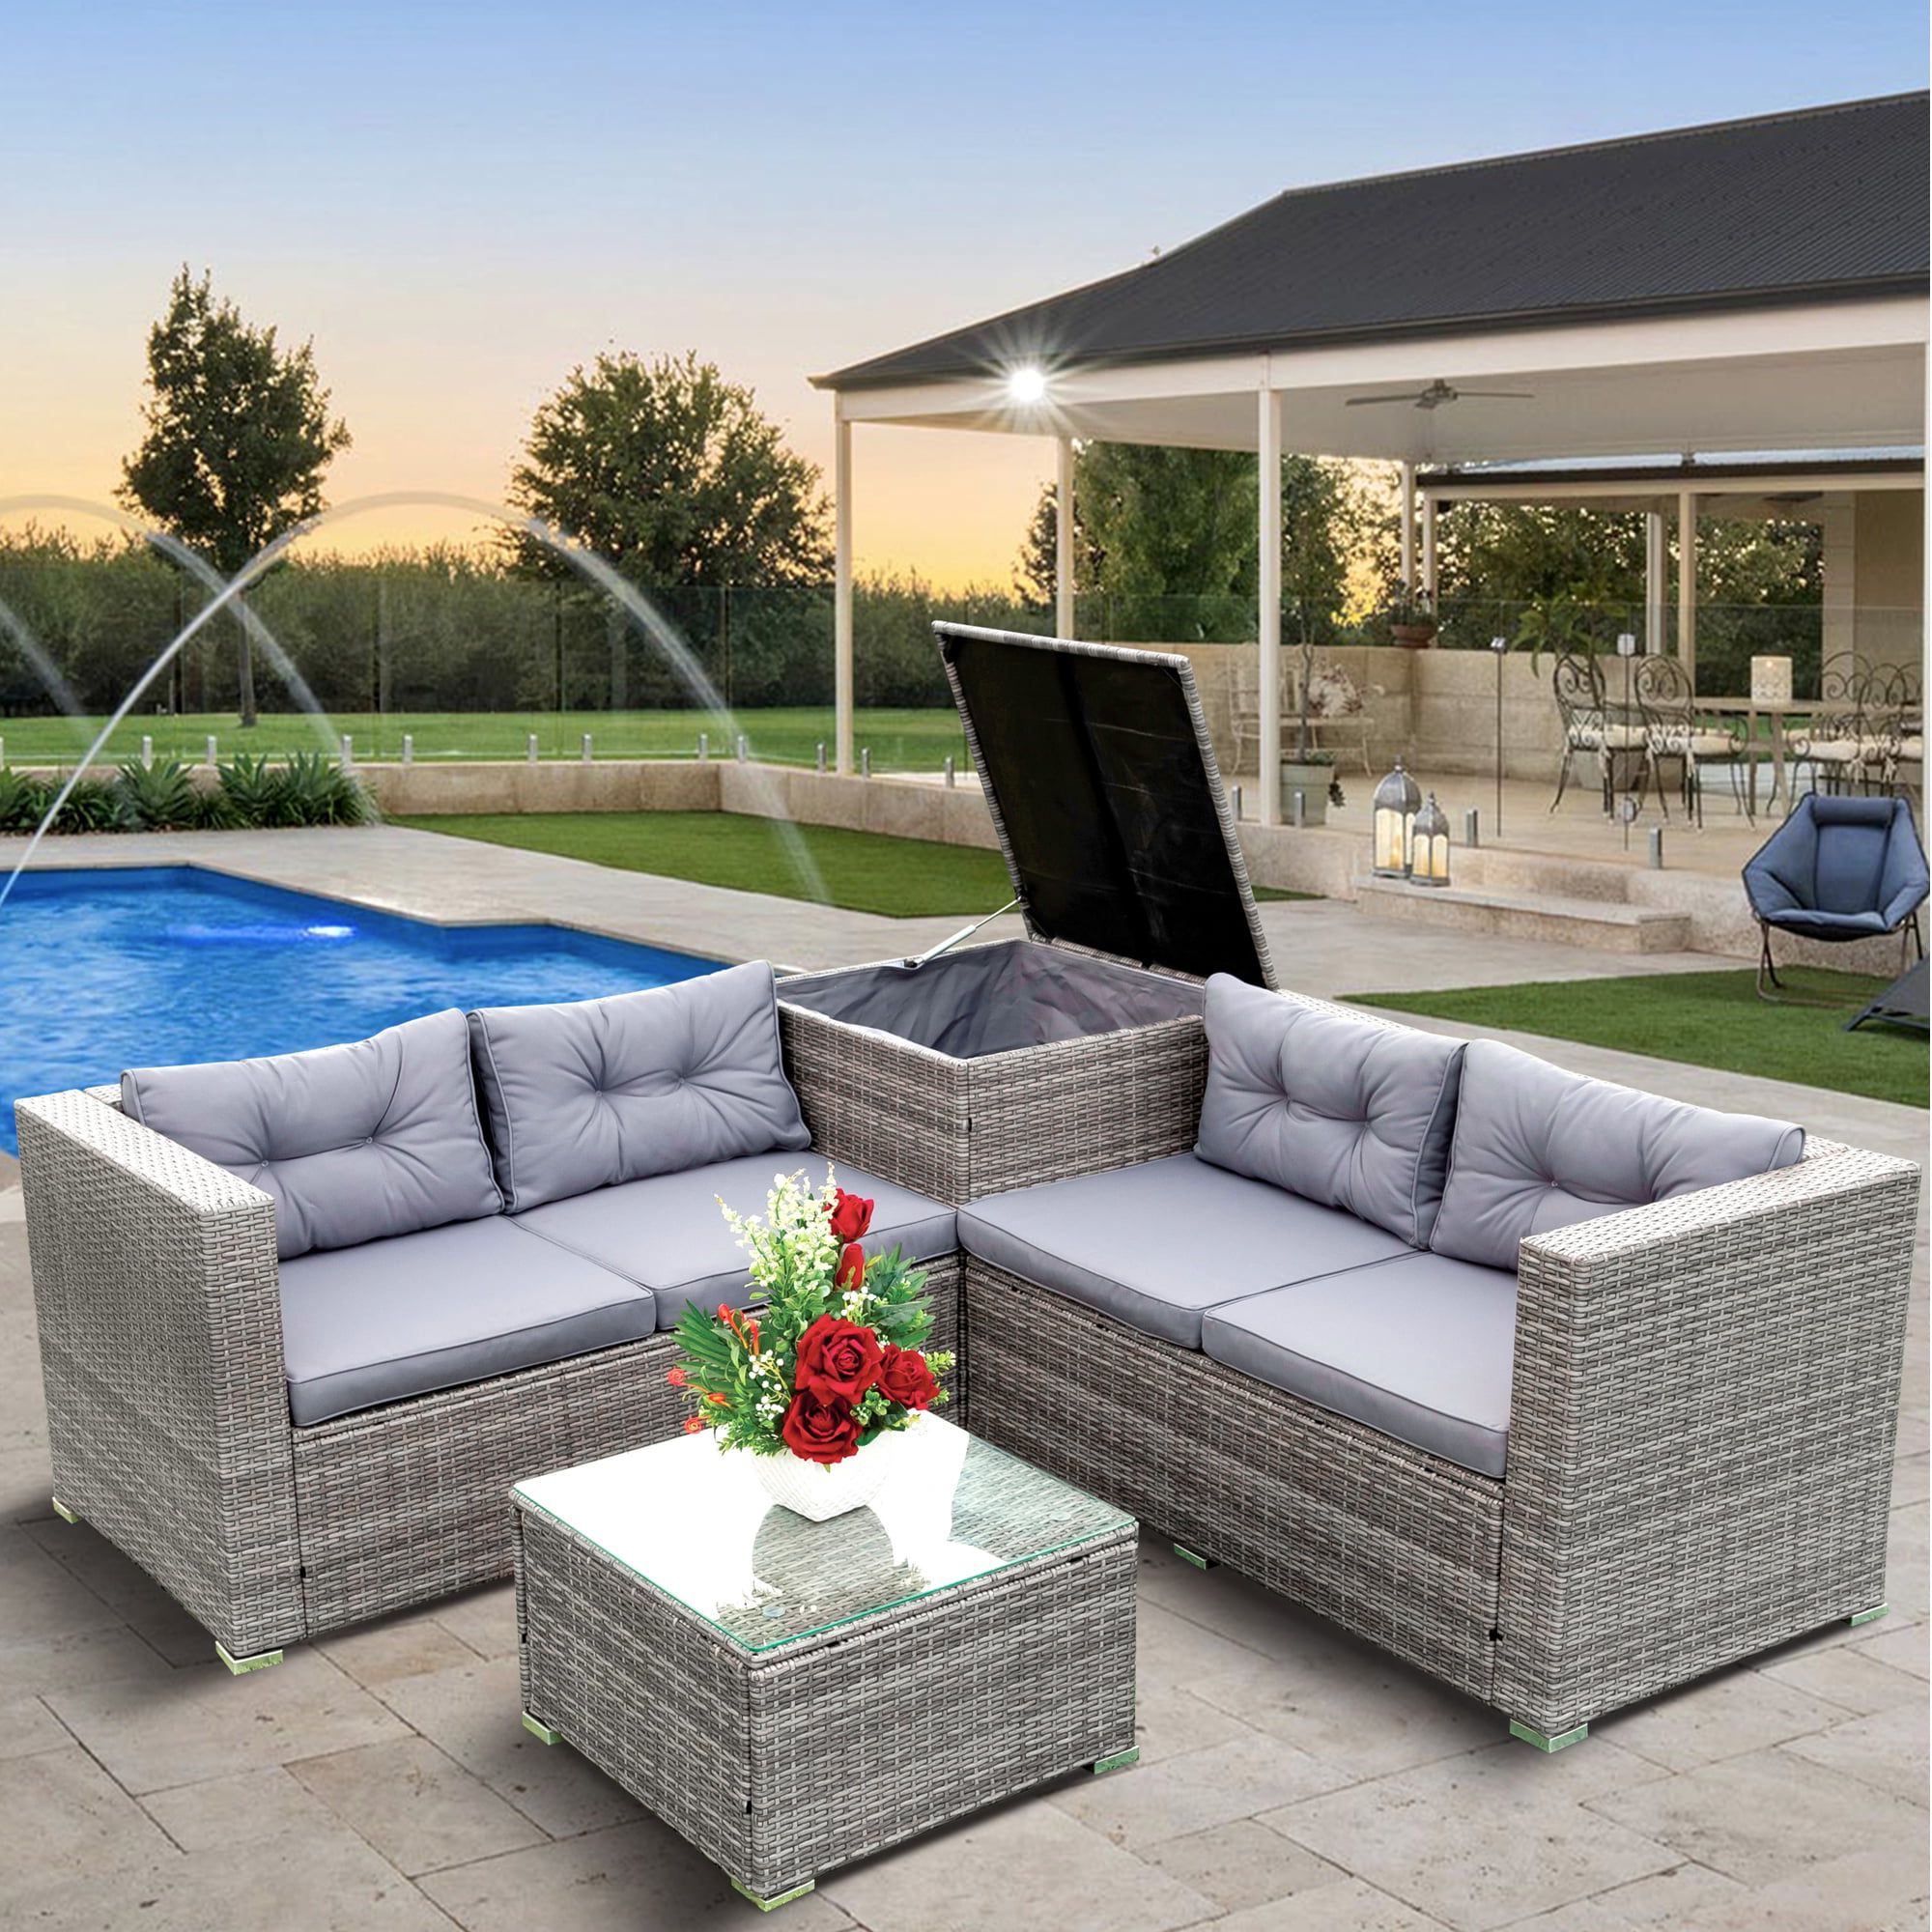 Well Liked Storage Table For Backyard, Garden, Porch Intended For 4 Piece Patio Dining Set, All Weather Outdoor Conversation Set With Storage  Ottoman, Wicker Sectional Sofa Furniture Set With Gray Cushions And Table  For Backyard, Porch, Garden, Poolside – Walmart (View 12 of 15)